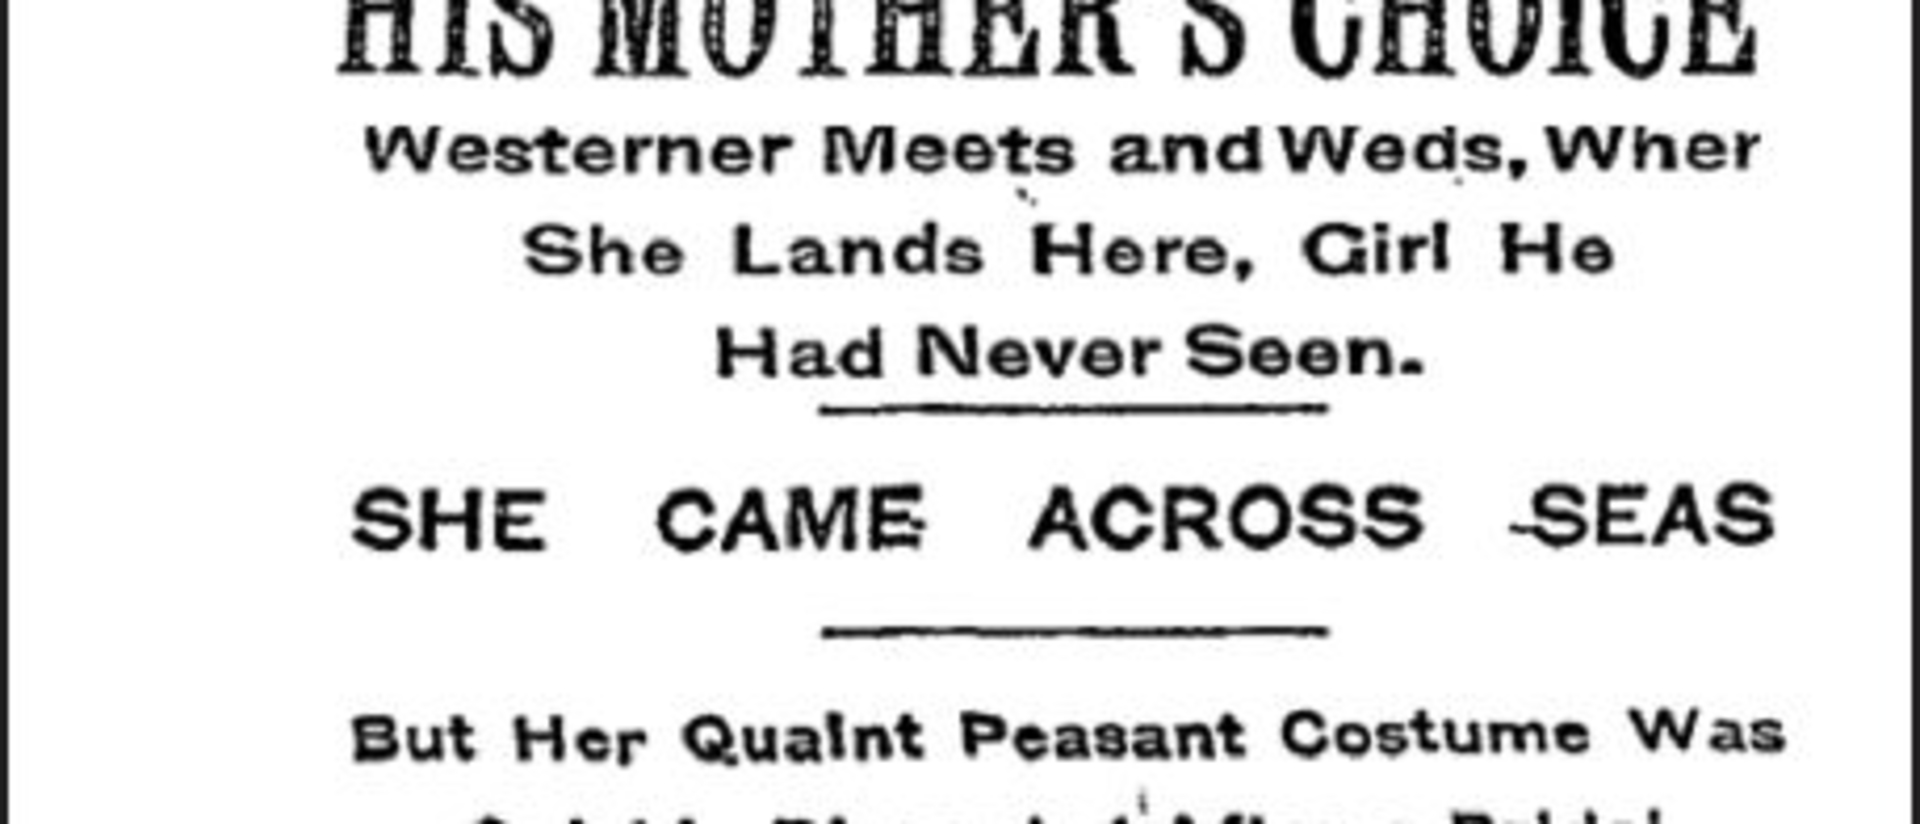 Headline in a 1910 New York Times article about an arranged marriage in New York City between Hungarian immigrants who had never met one another